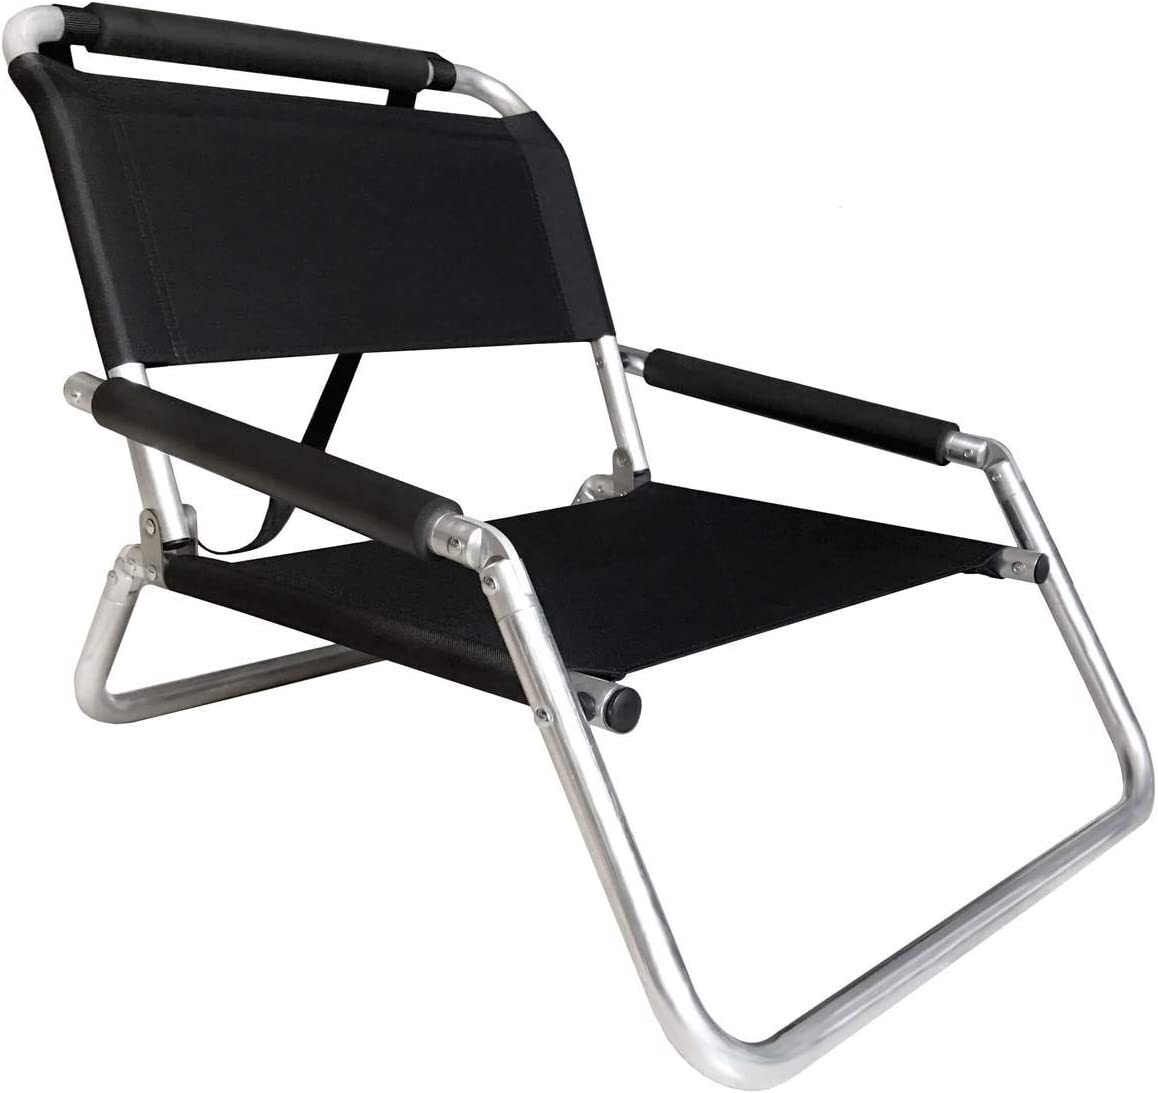 Set of Two Aluminum Folding Chairs